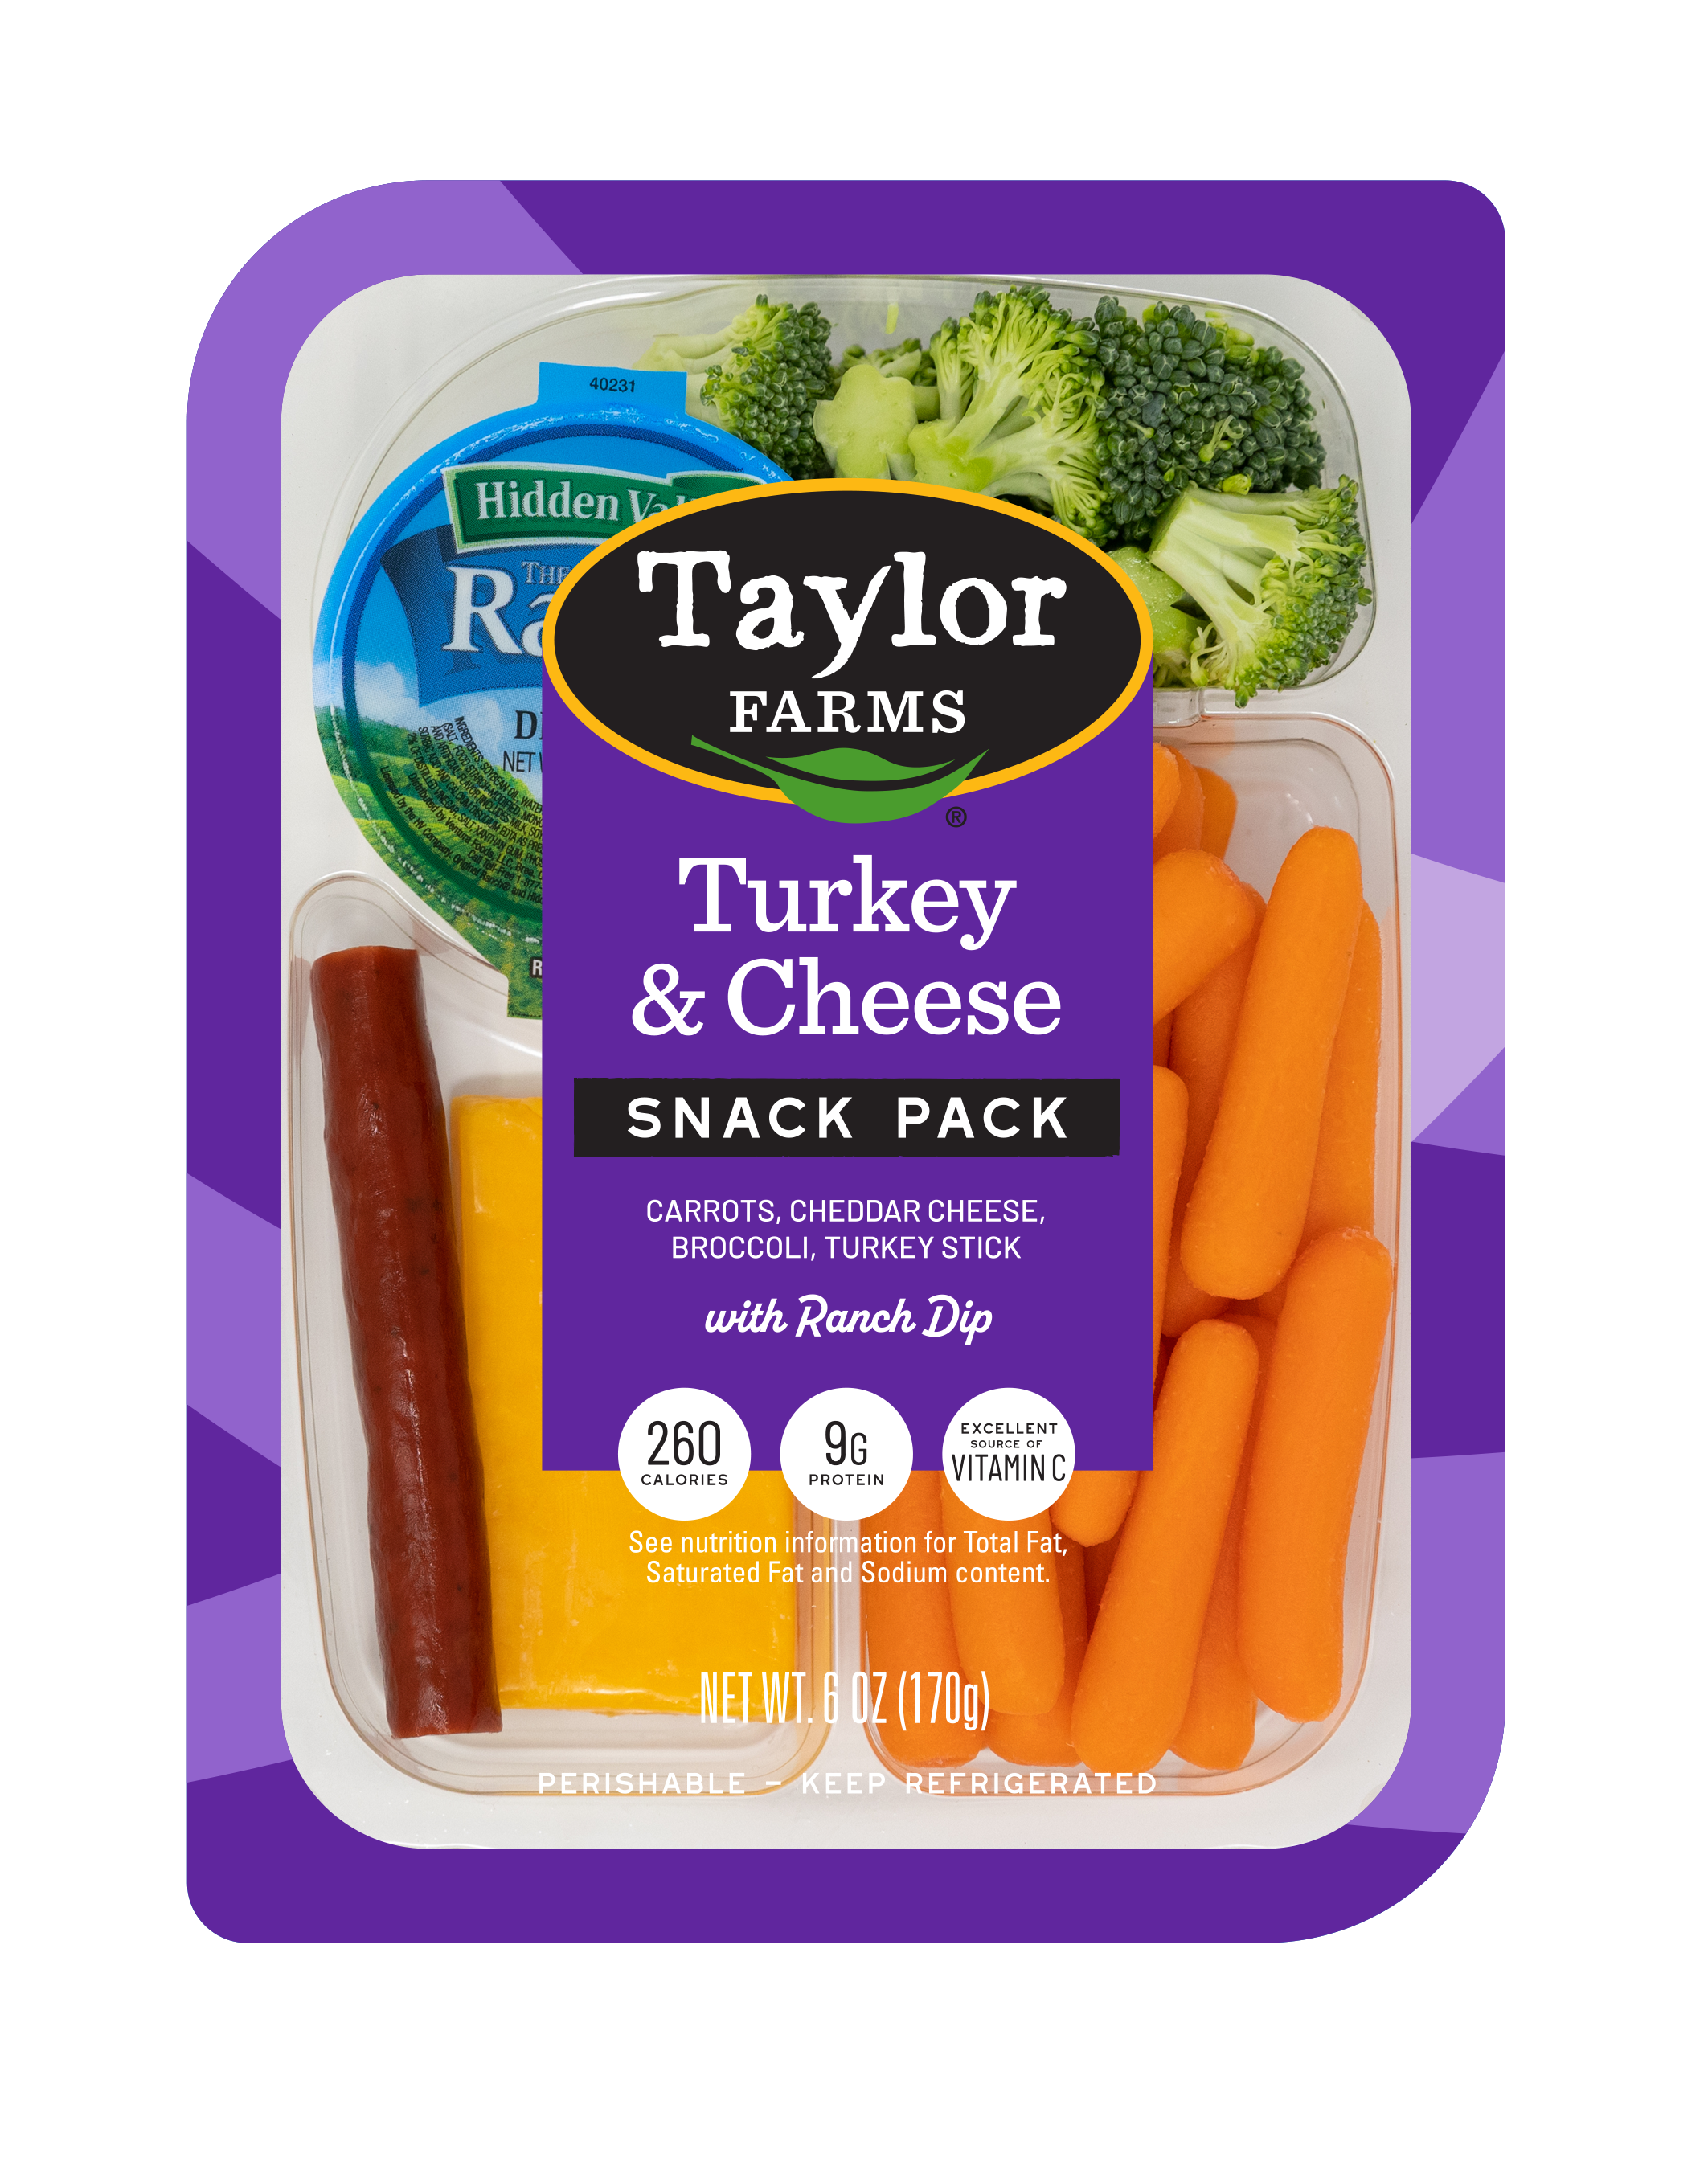 Taylor Farms Turkey & Cheese Snack Pack with turkey sticks, cheddar cheese, carrots, and broccoli.